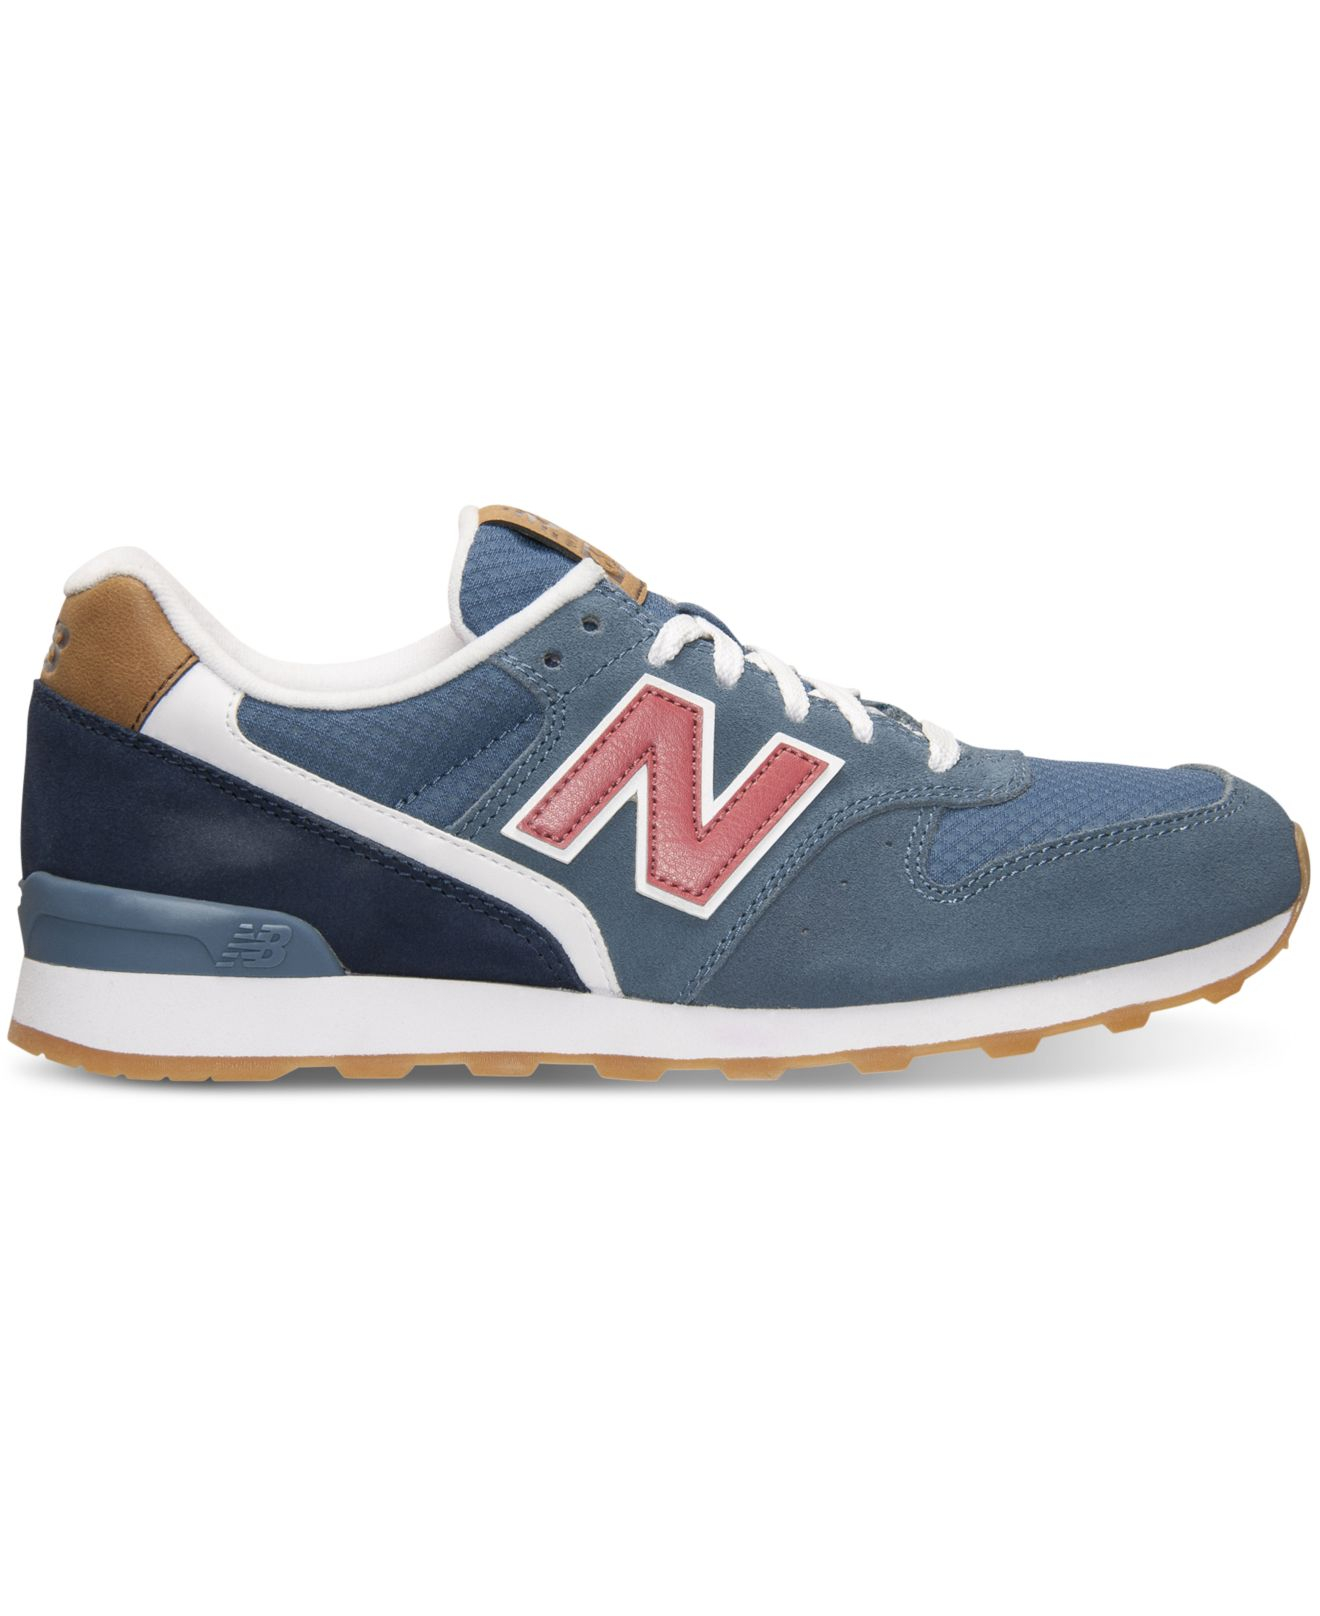 Lyst - New balance Women's 696 Casual Sneakers From Finish Line in Blue